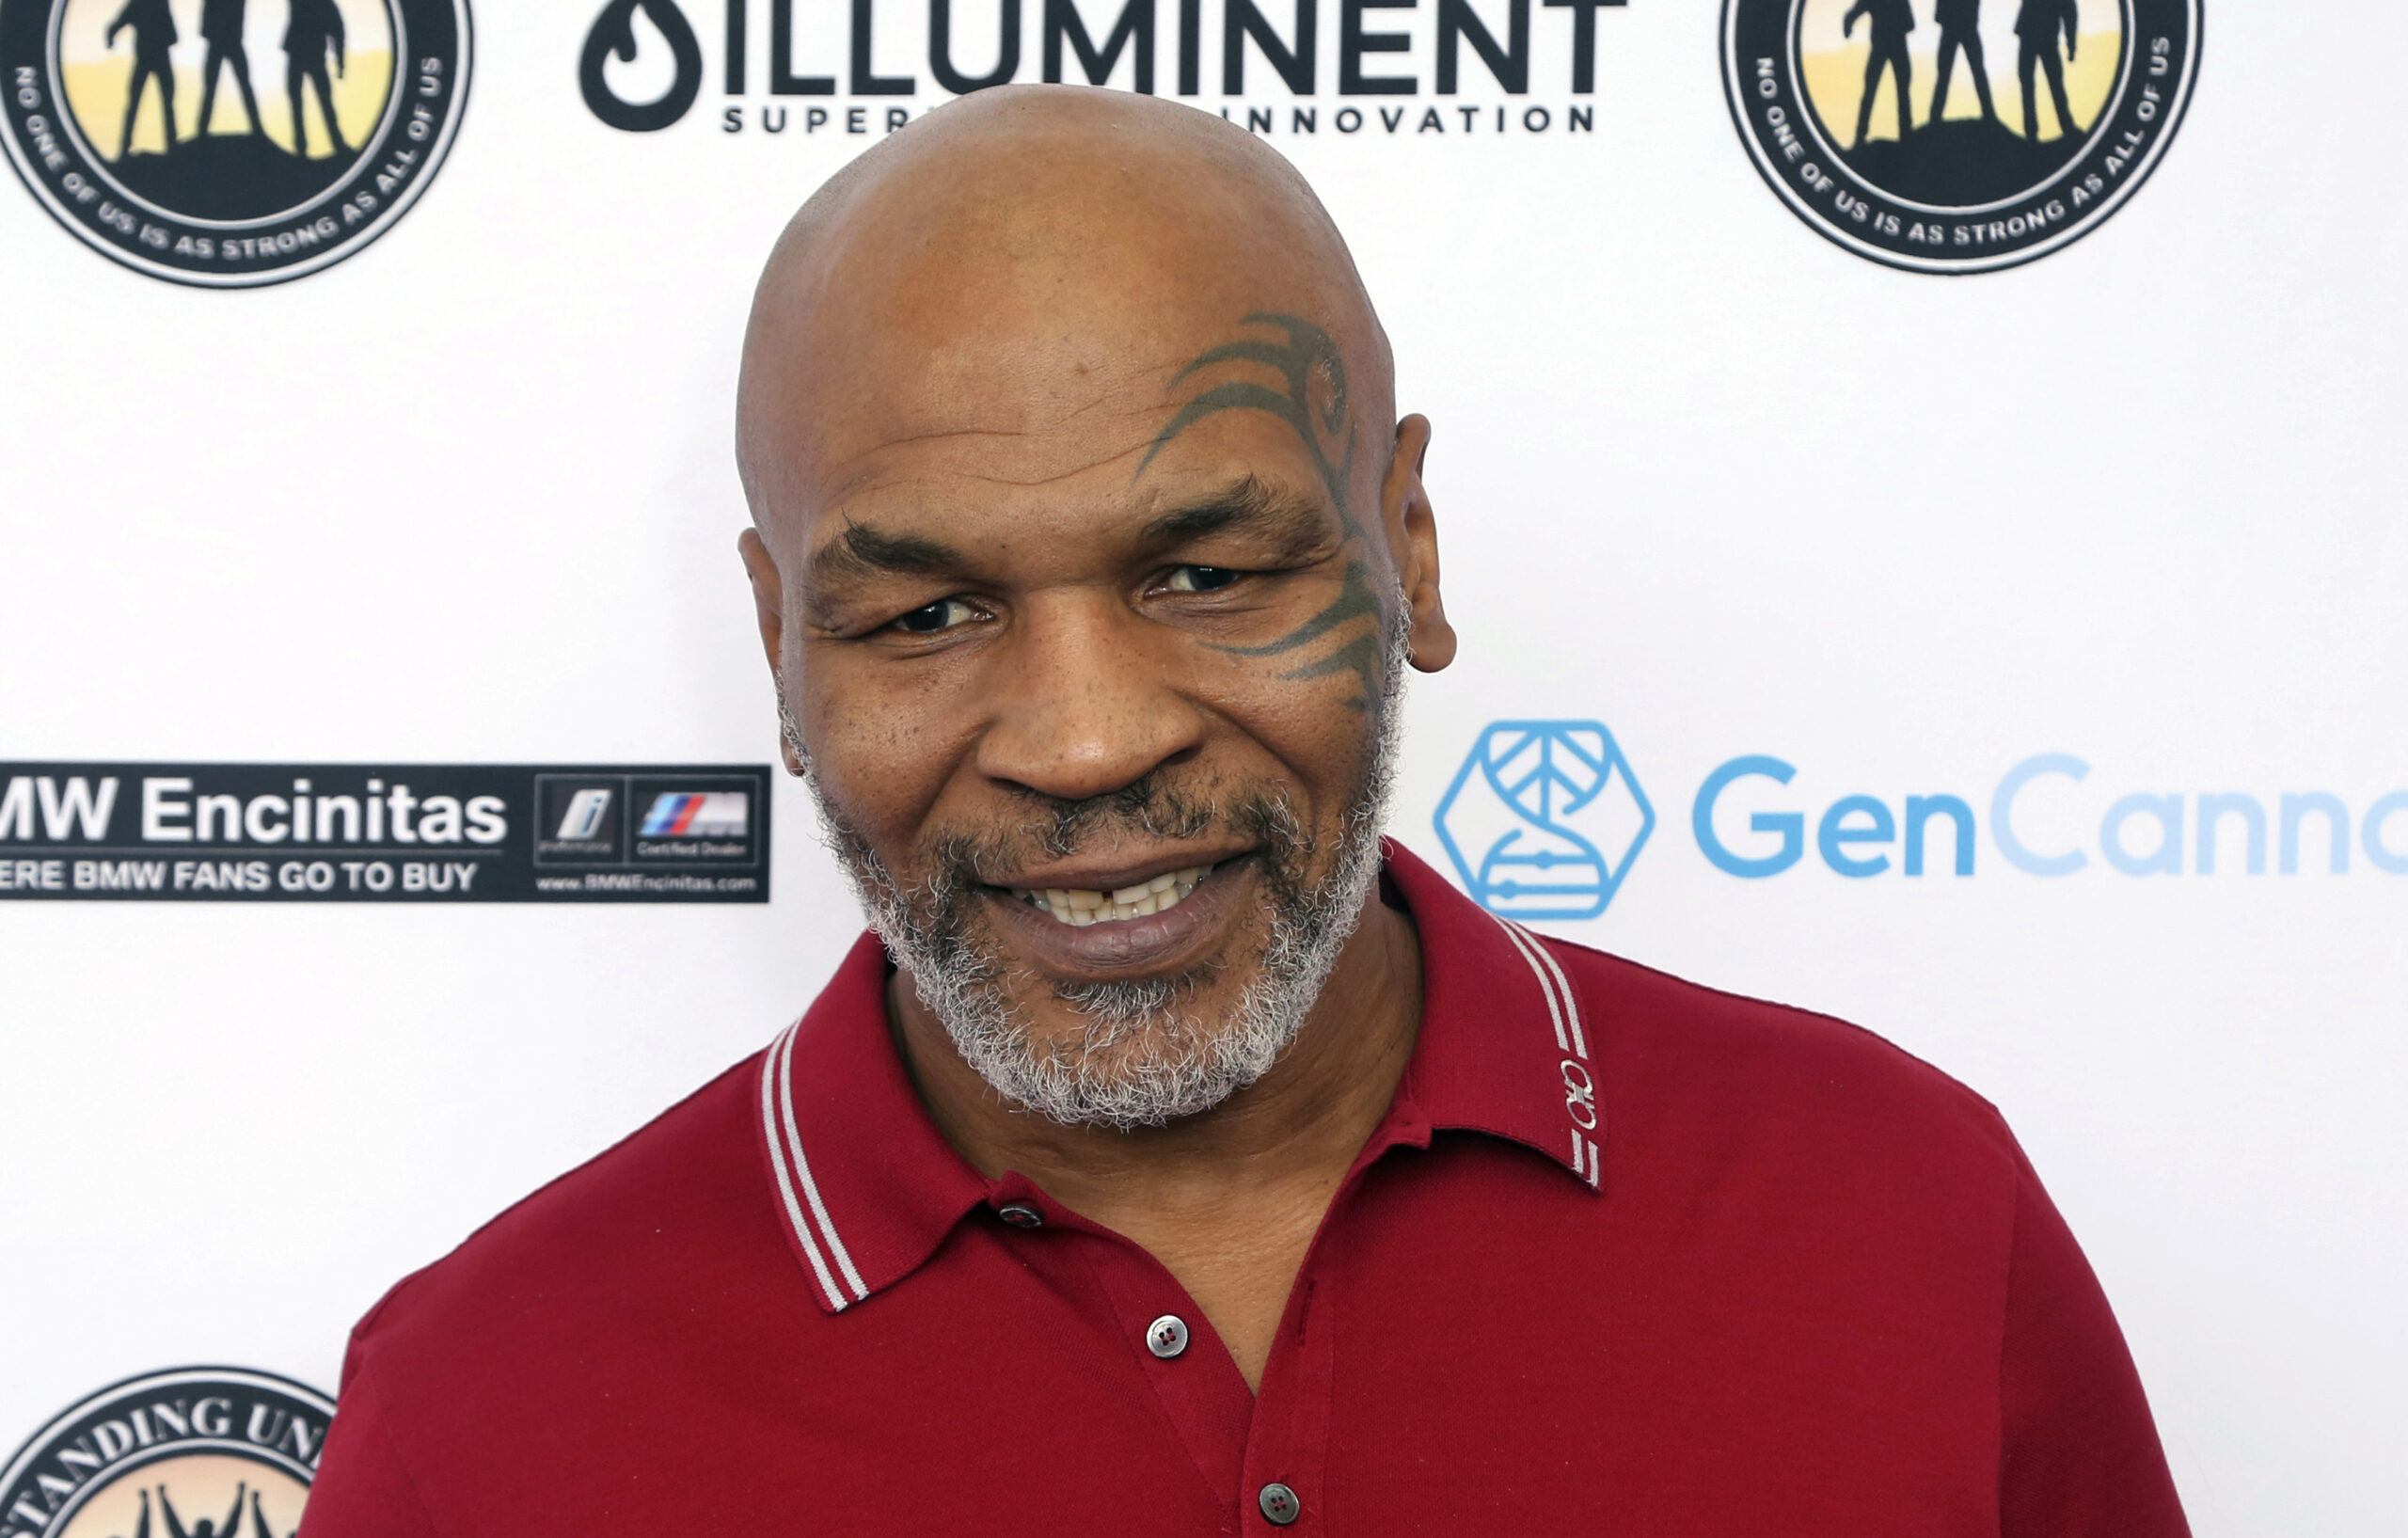 FILE - In this Aug. 2, 2019 photo, Mike Tyson attends a celebrity golf tournament in Dana Point, Calif. Authorities are investigating after cellphone video appears to show Mike Tyson hitting another passenger on a plane at San Francisco International Airport. (Photo by Willy Sanjuan/Invision/AP, File)